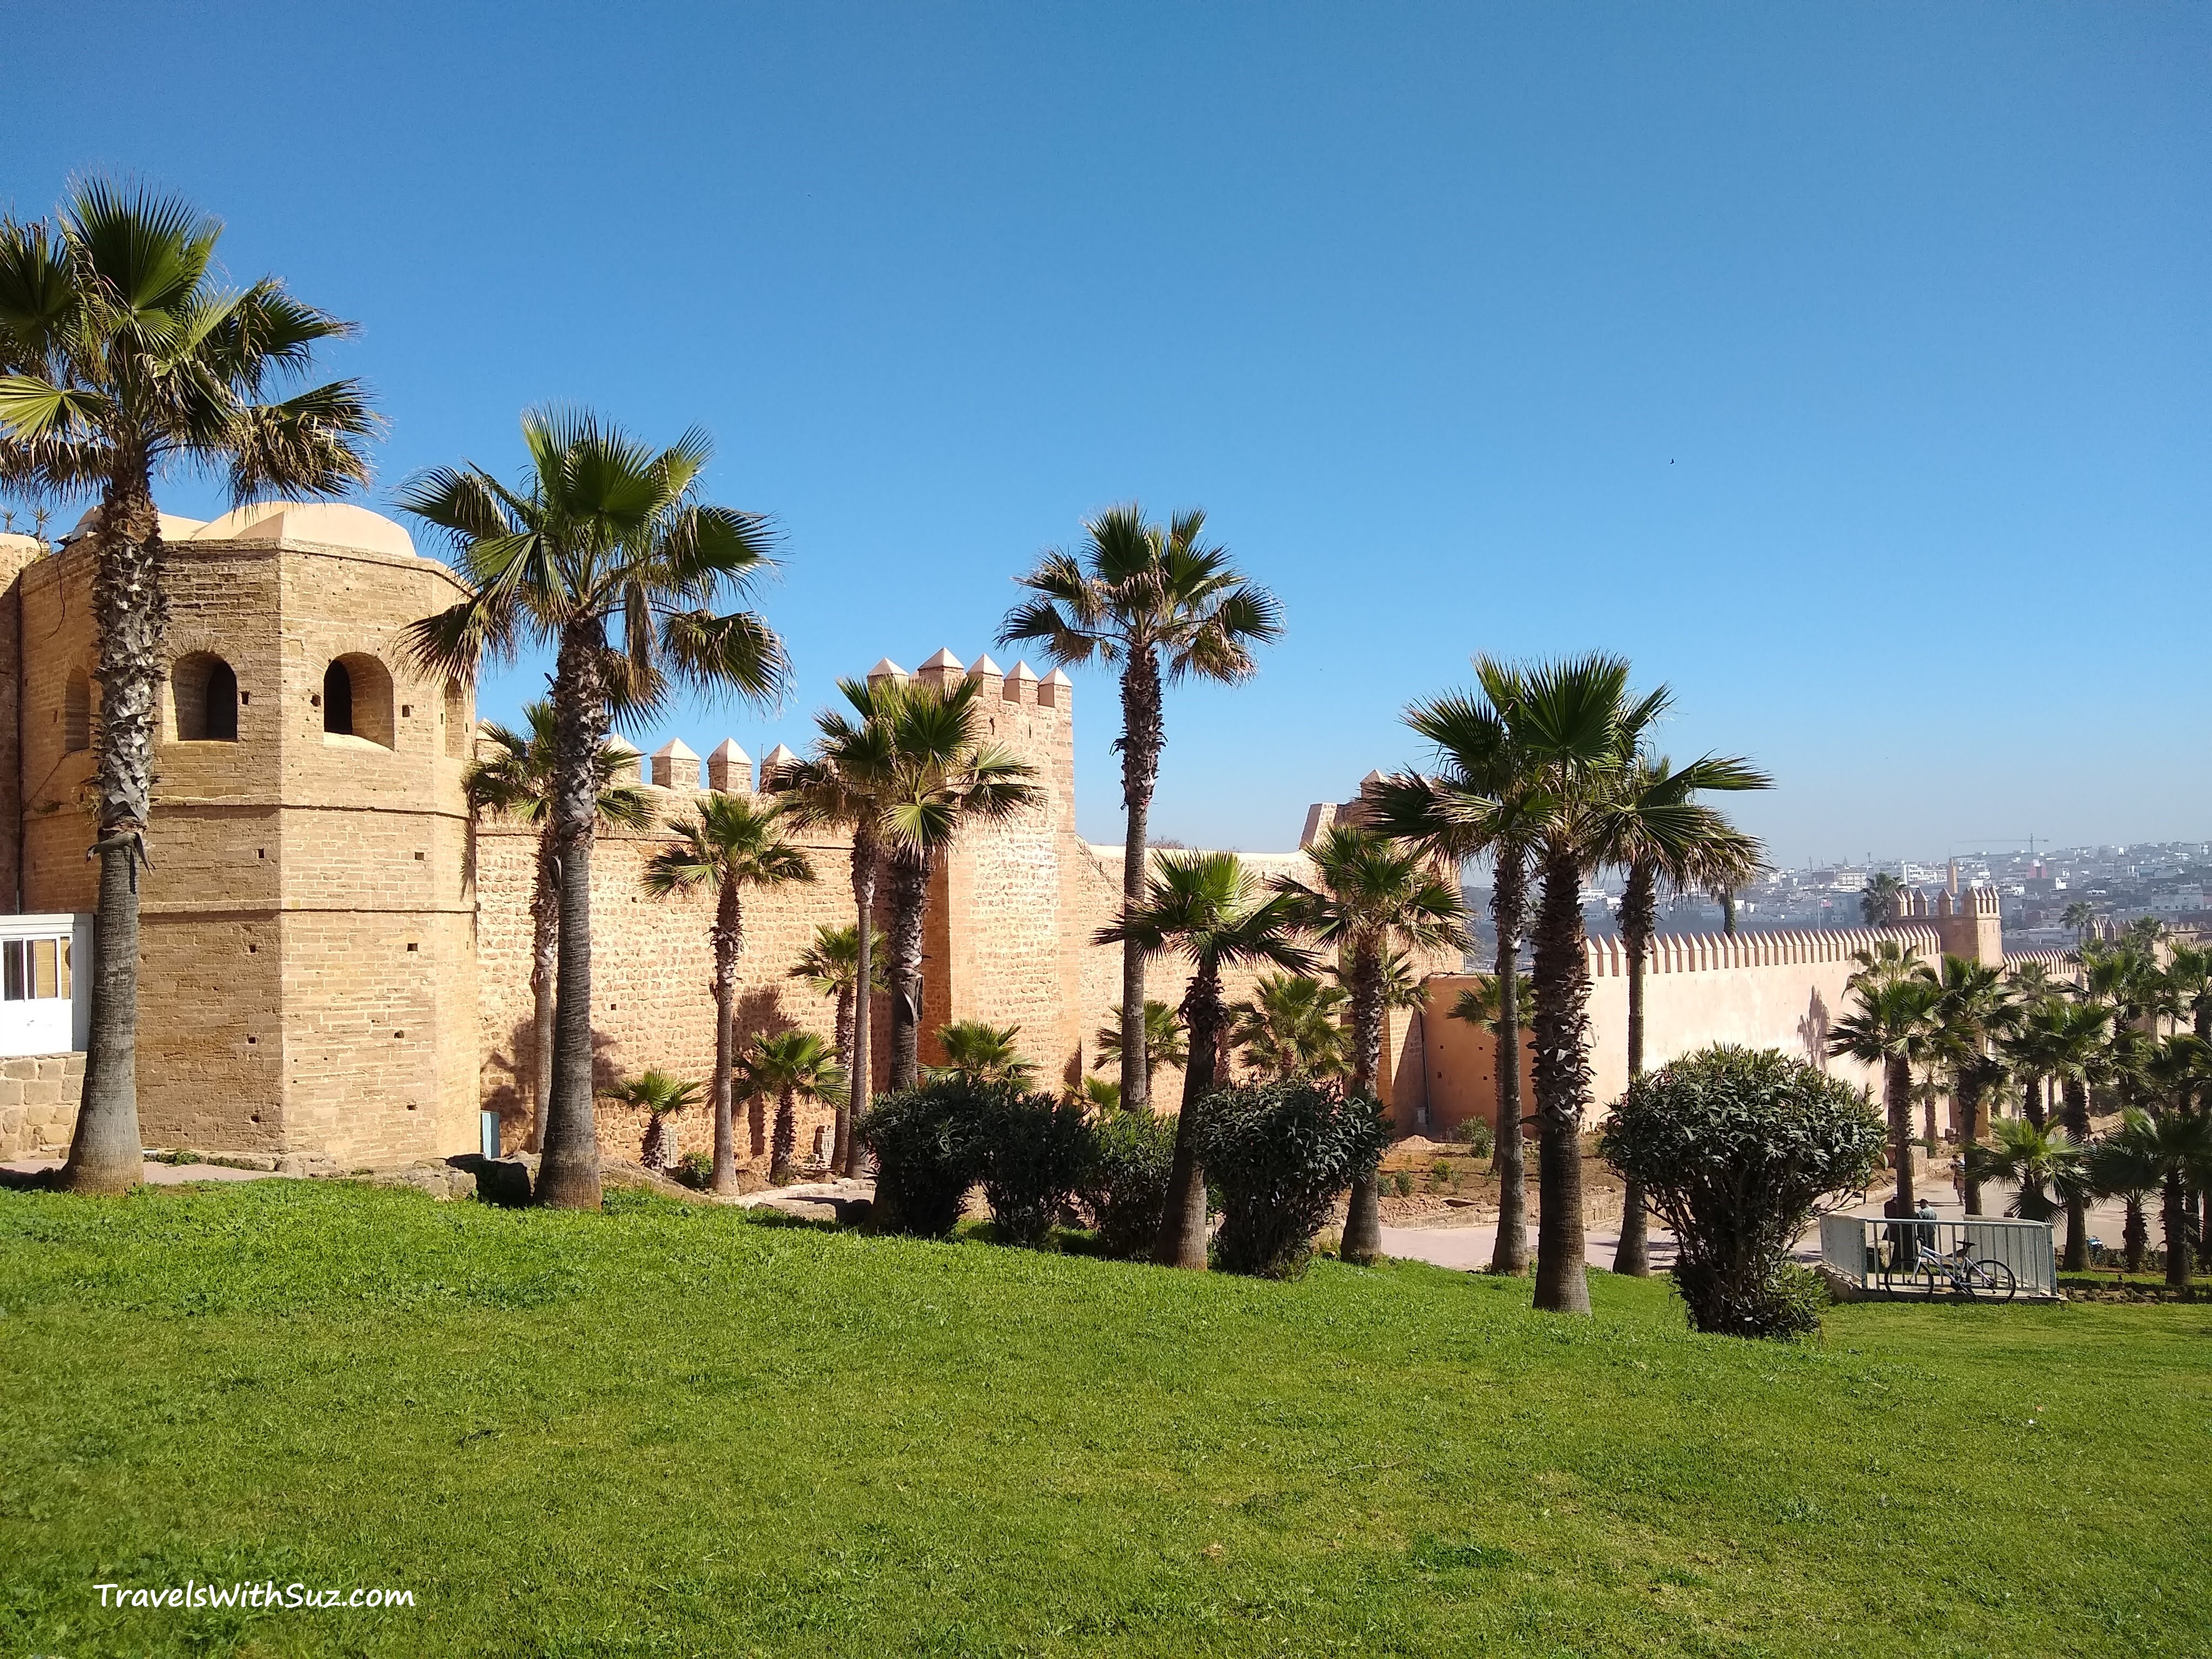 wall of the kasbah, with palm trees